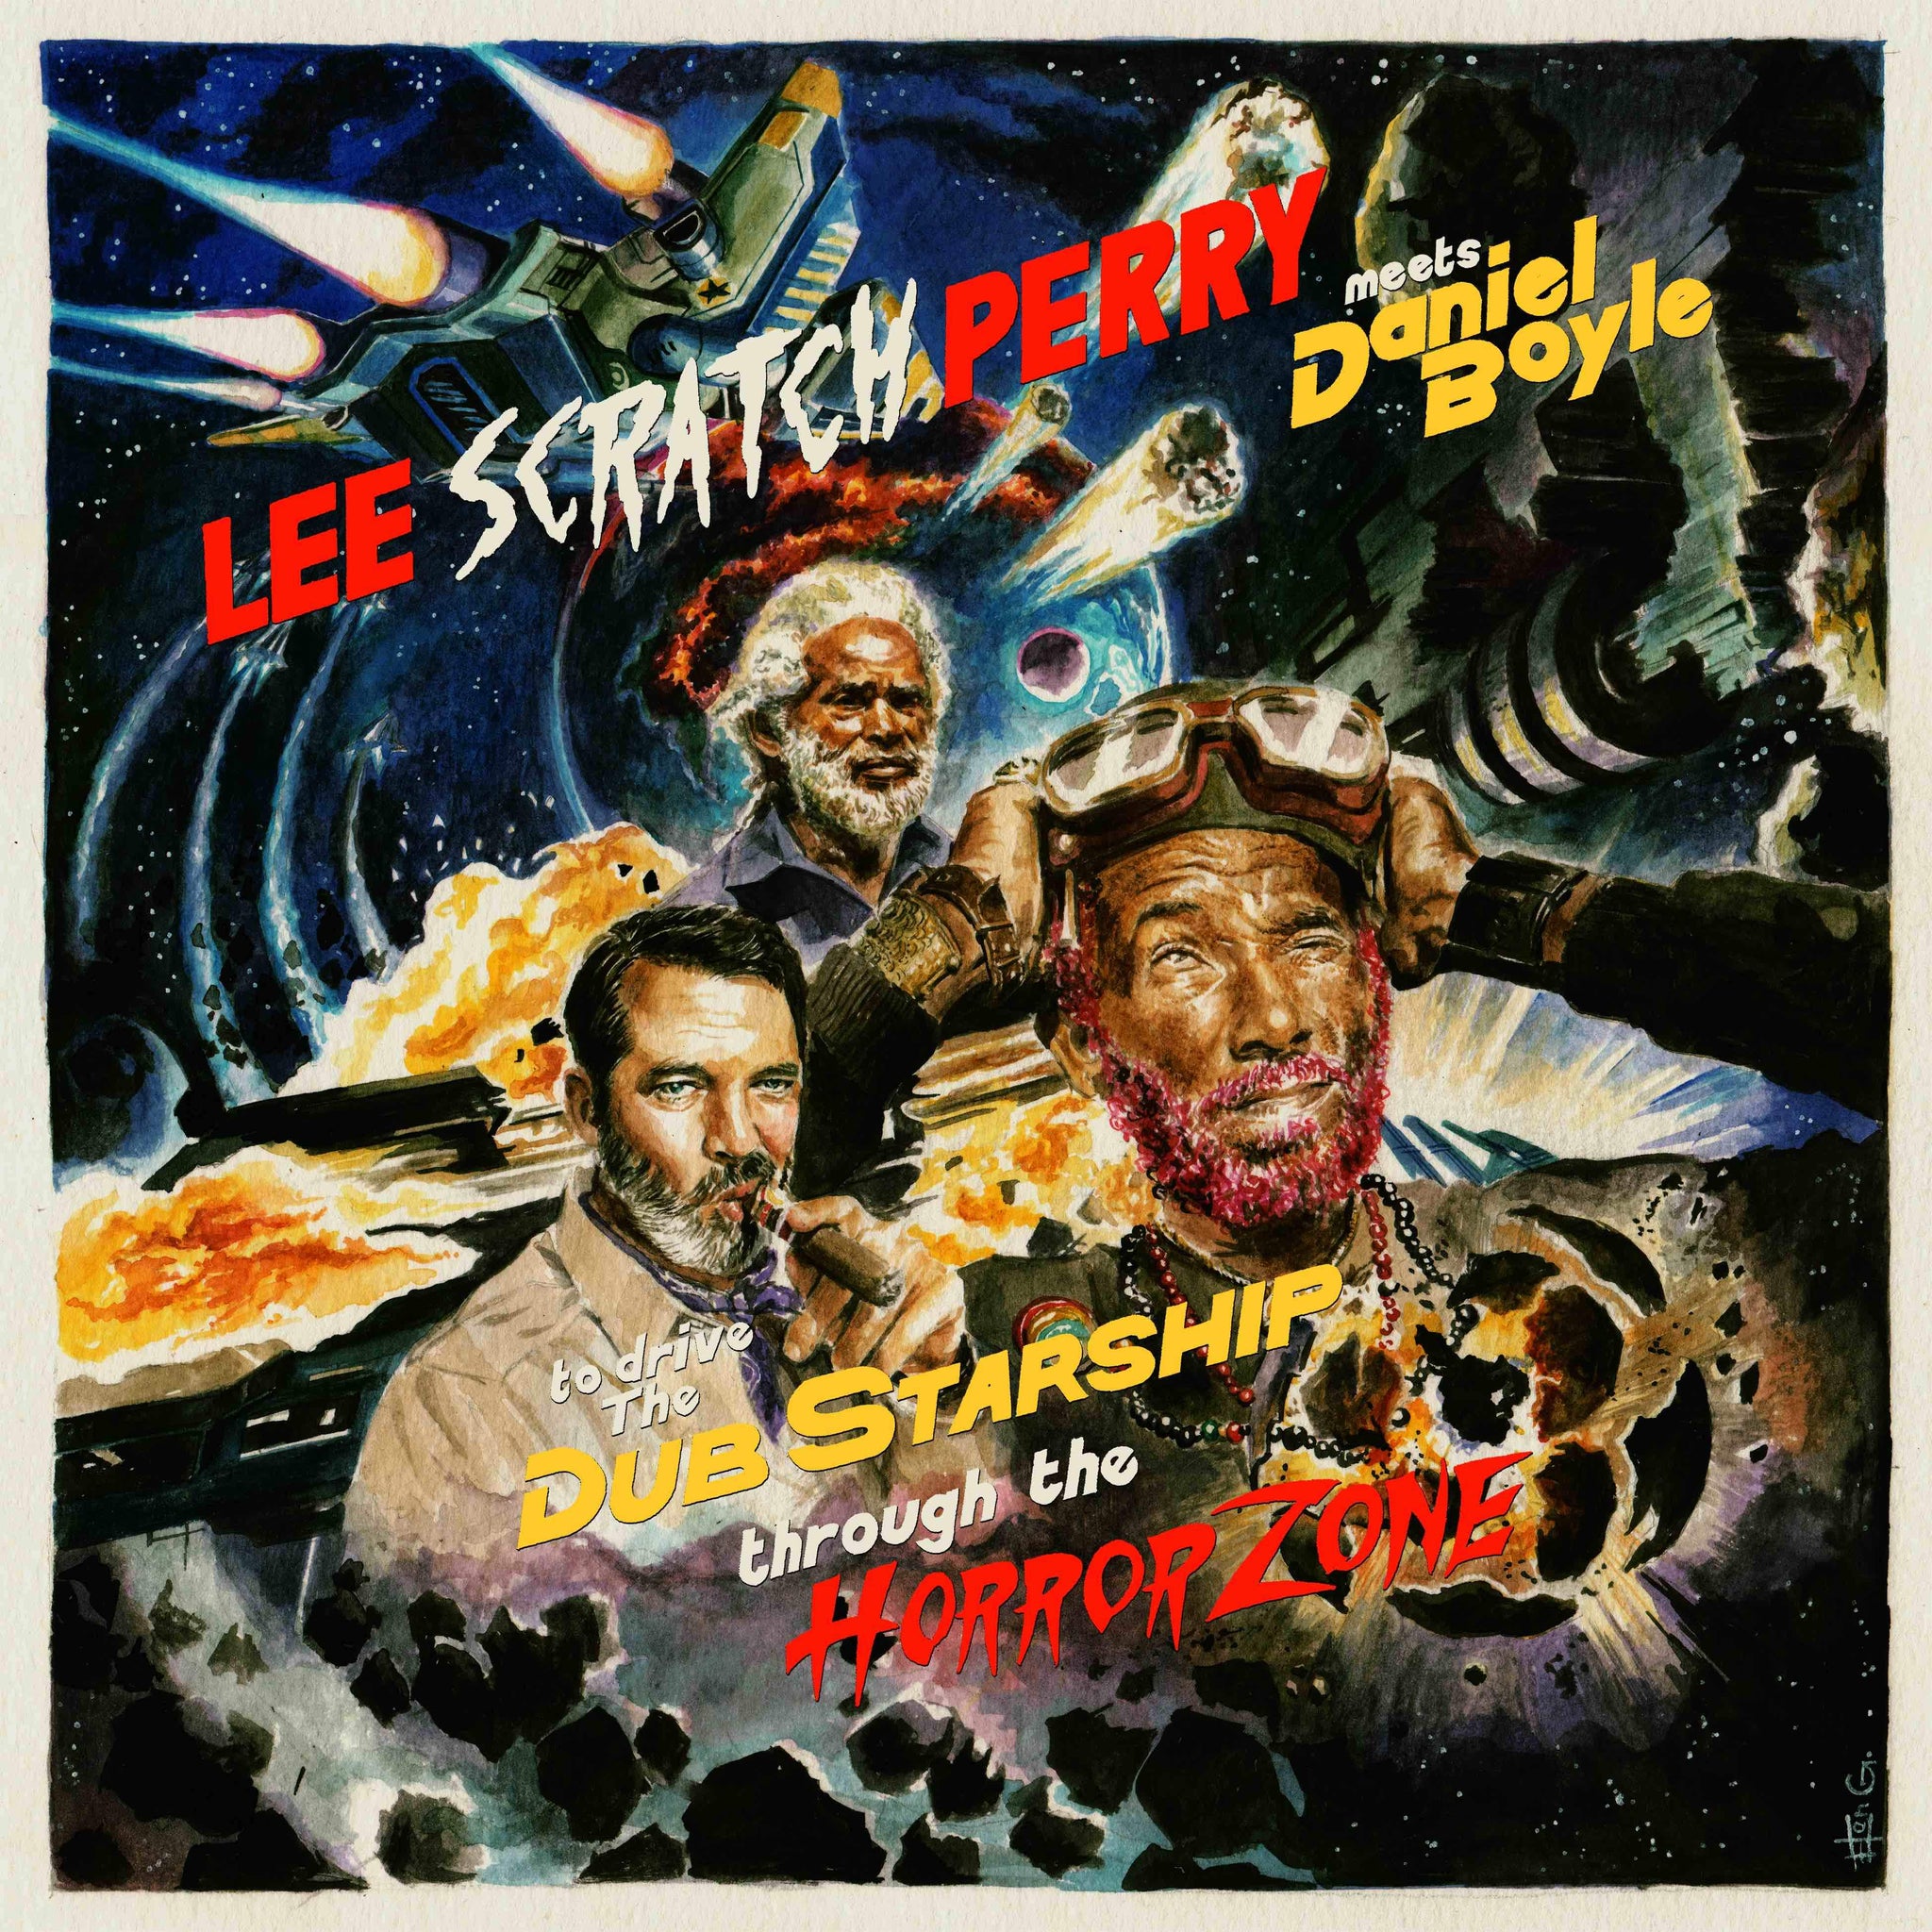 Lee 'Scratch' Perry & Daniel Boyle featuring Max Romeo - Horror Zone